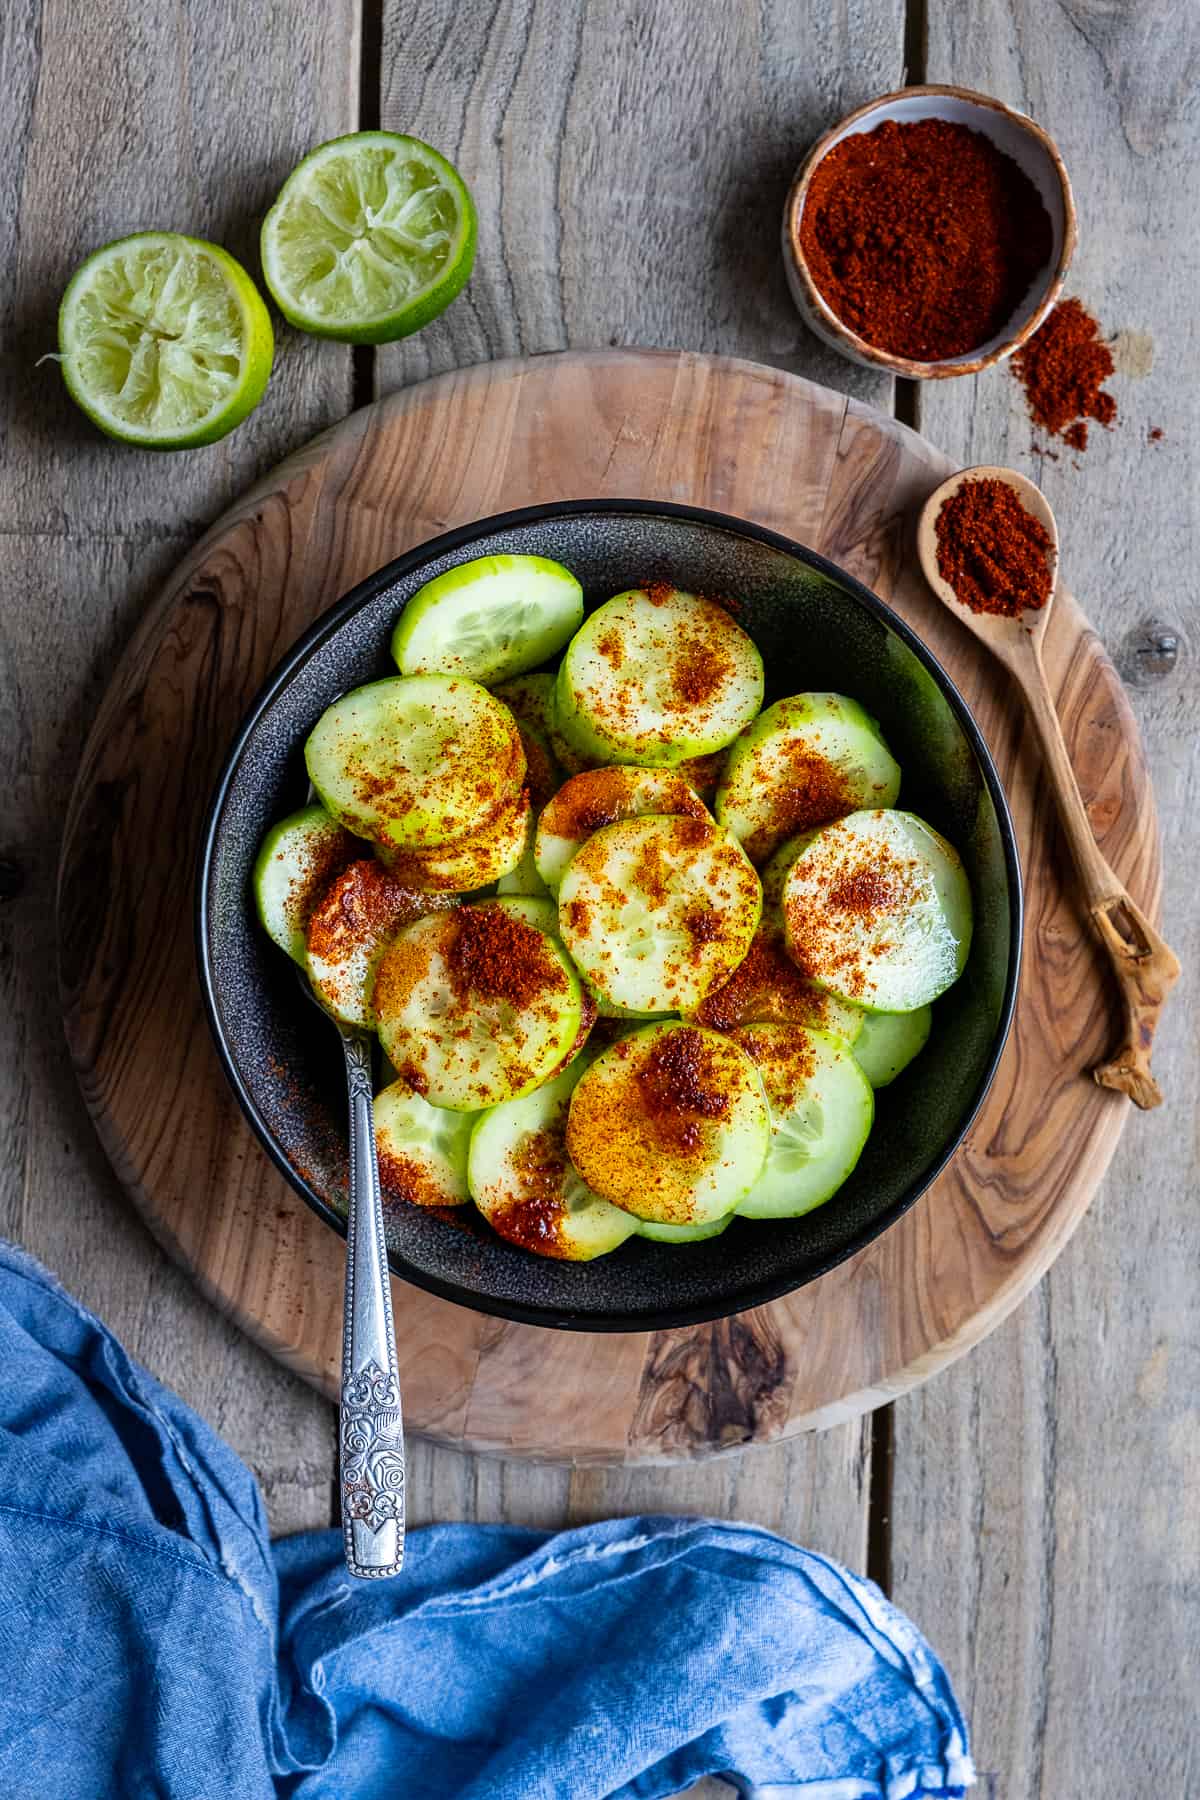 Cucumber slices with chili powder in a black bowl.